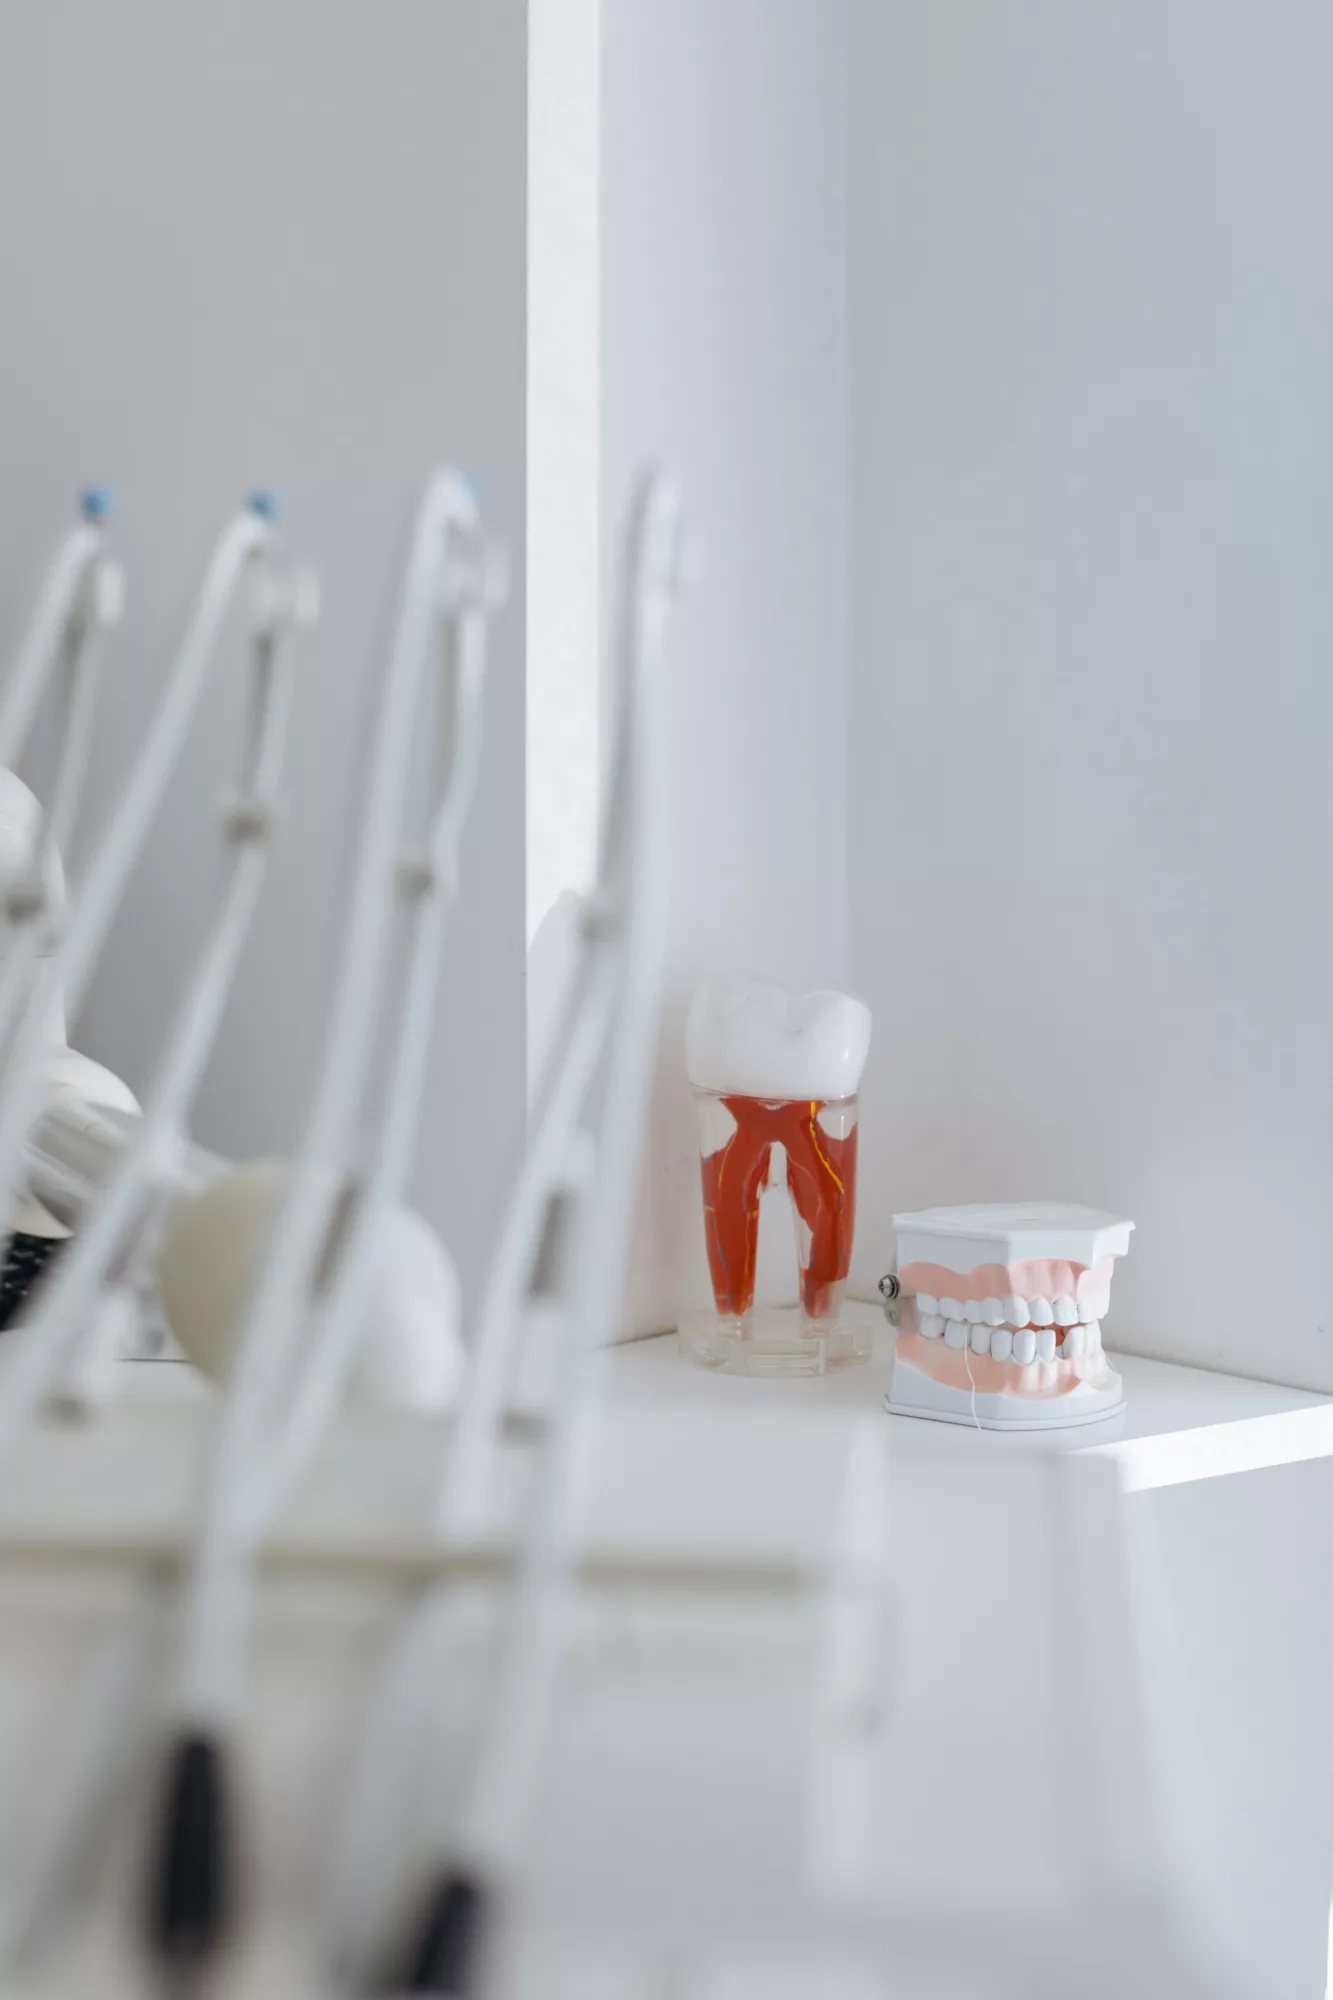 A white wall with a sink and toothbrush, creating a clean and hygienic environment for personal care.